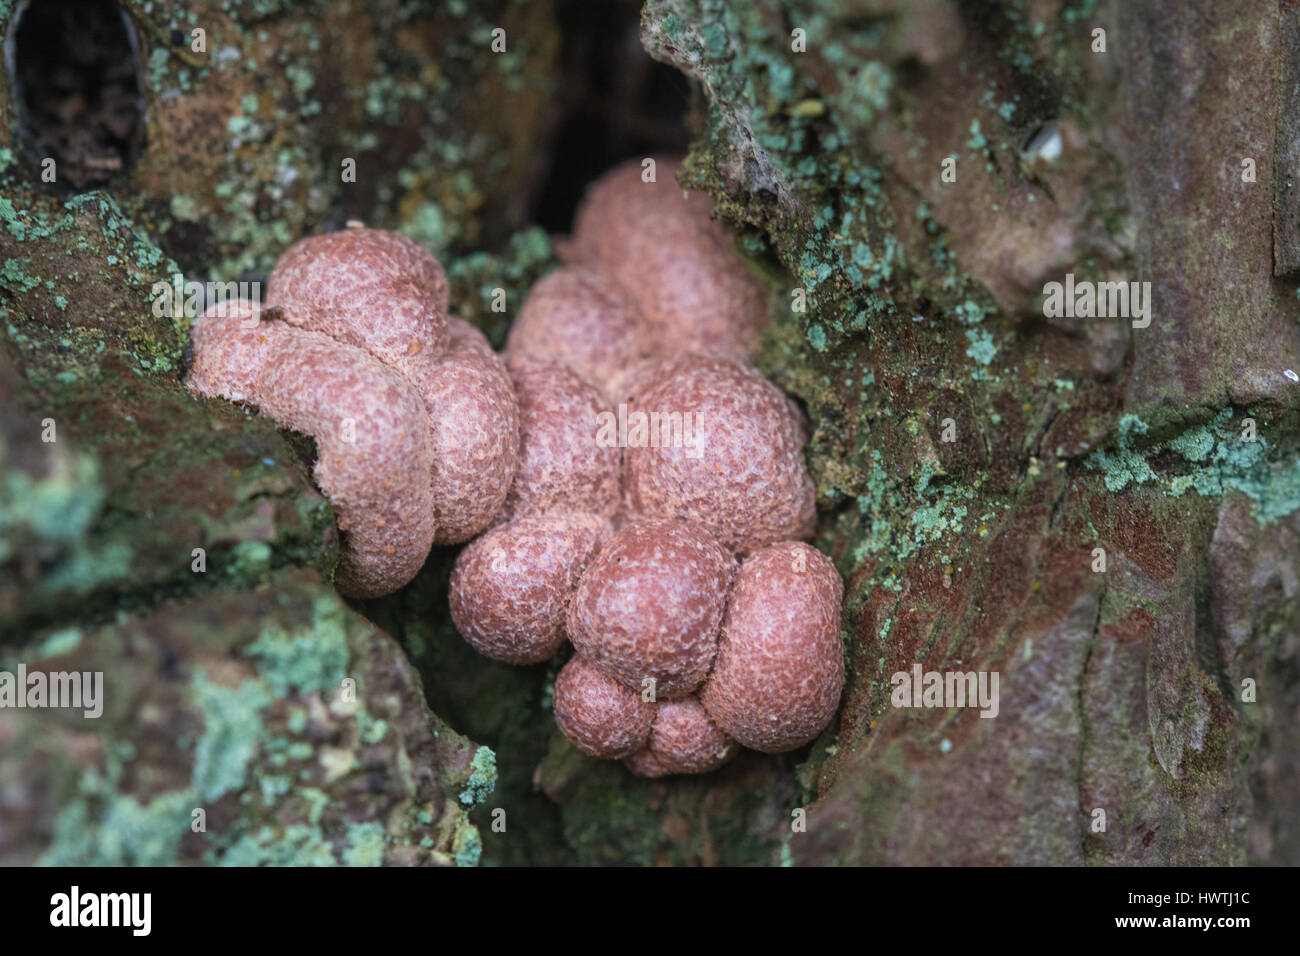 Slime mould (Lycogala species) Stock Photo